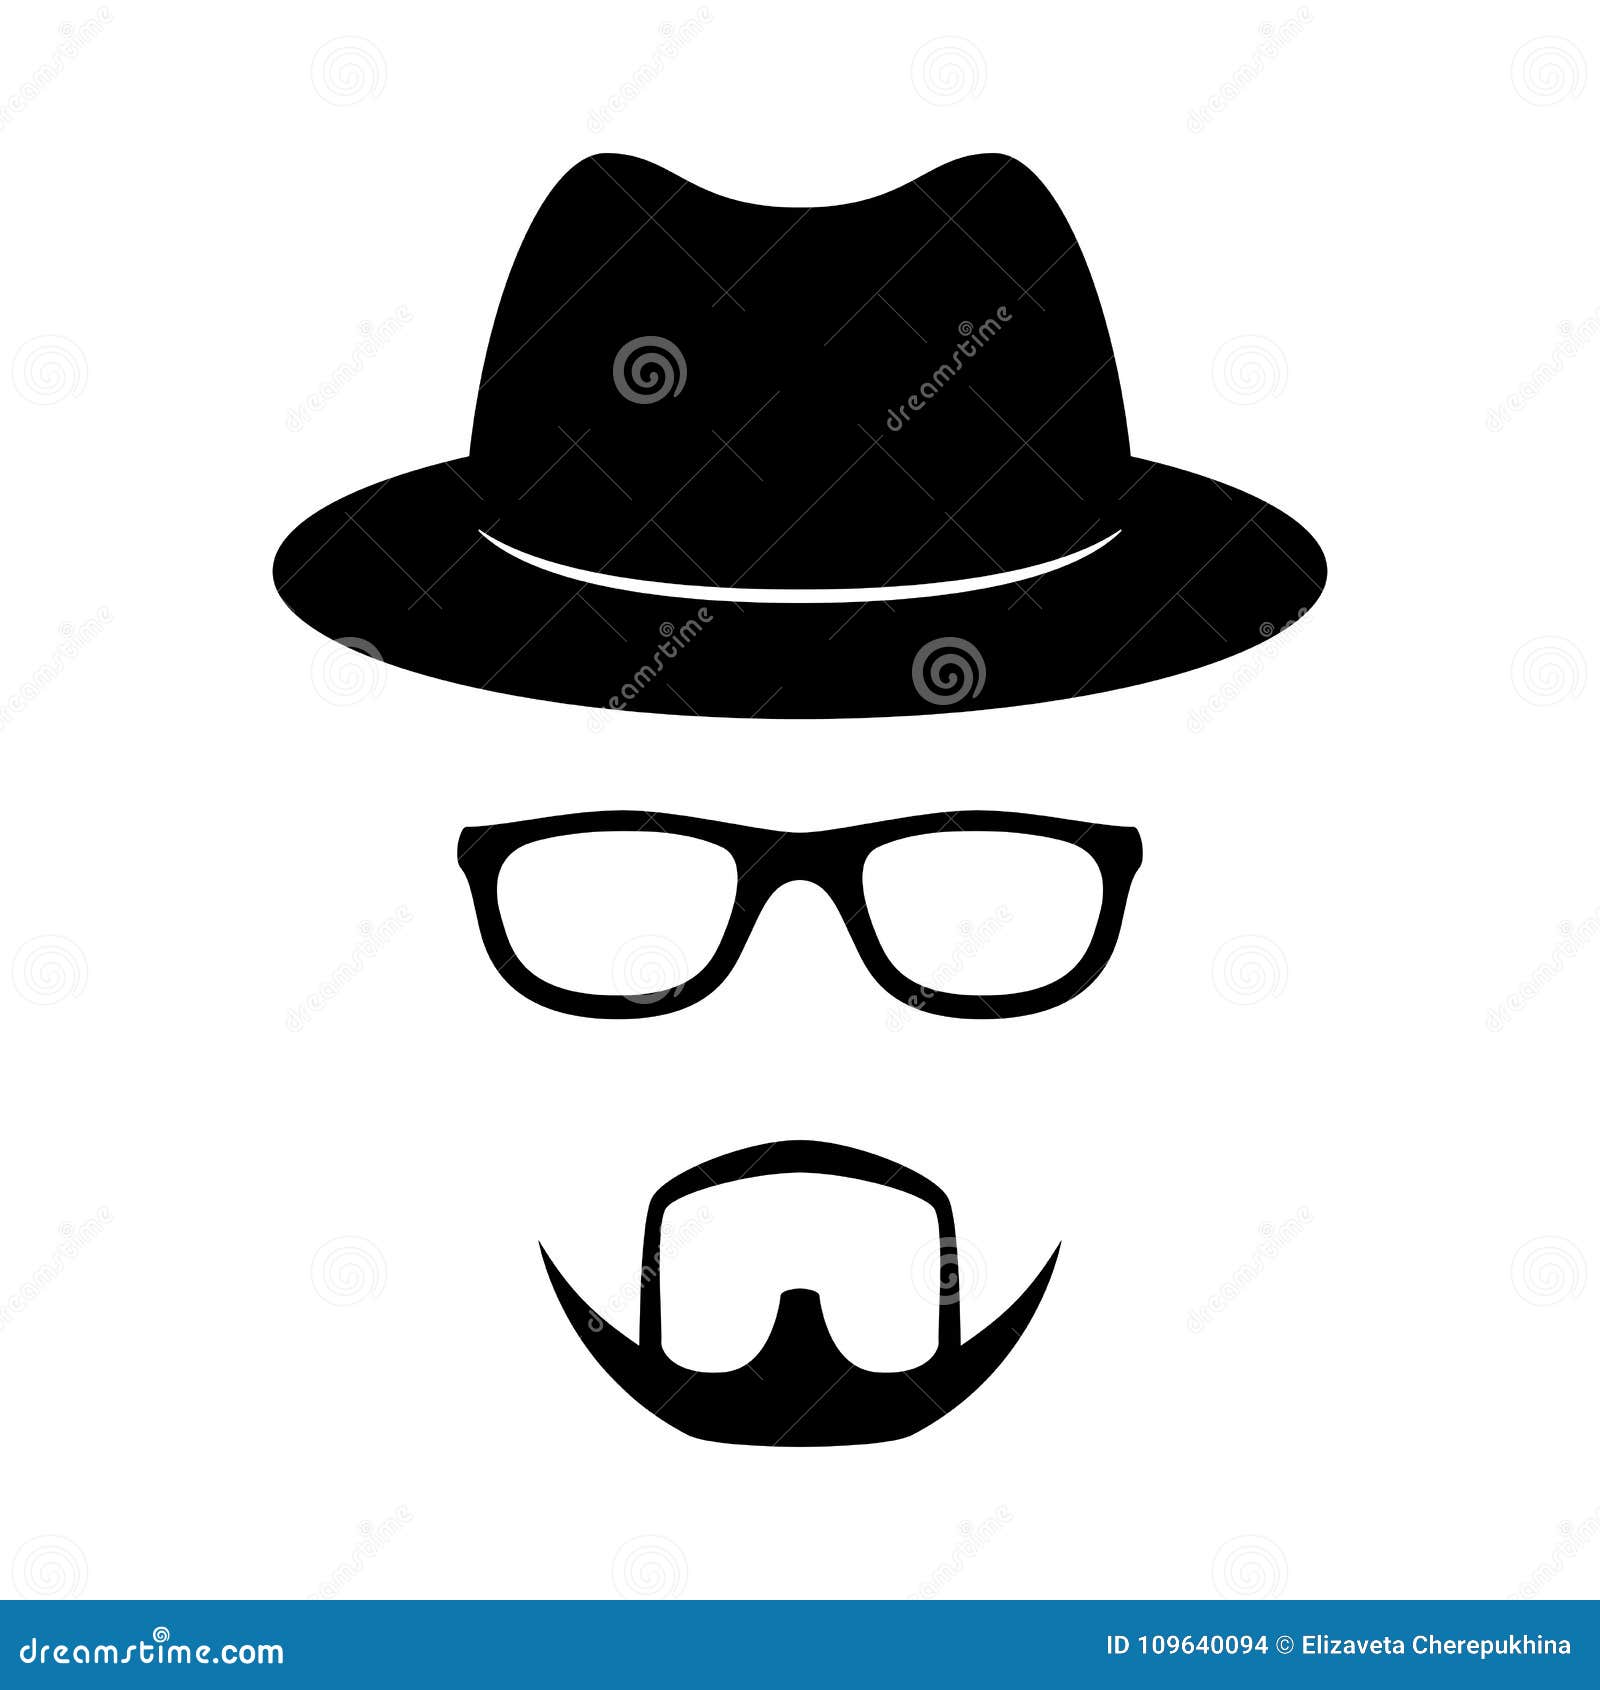 https://thumbs.dreamstime.com/z/incognito-icon-man-face-glasses-beard-hat-photo-props-vector-incognito-icon-man-face-glasses-beard-hat-photo-109640094.jpg